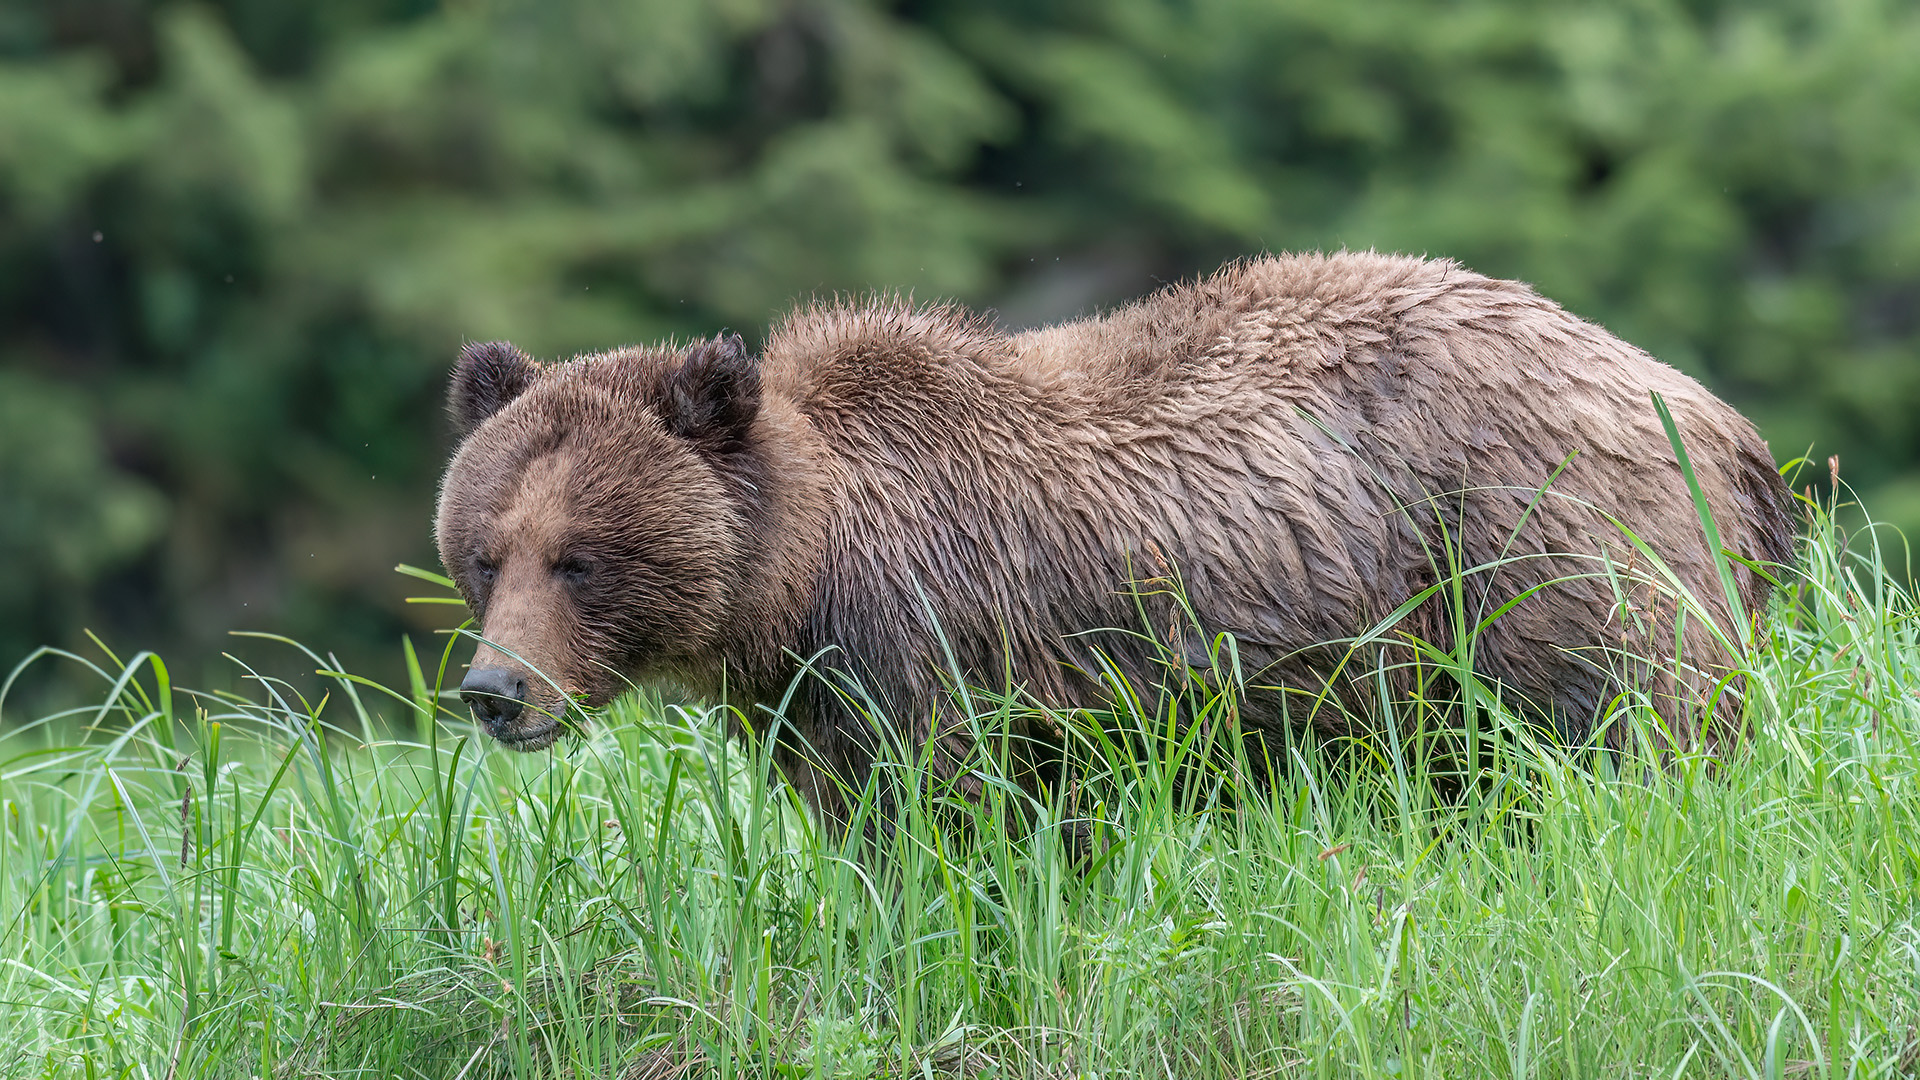 This image shows a relatively uniform brown bear. Note the thinner fur on the bear’s forehead, typical during springtime among most male bears, as they rub intensely on scent-marking trees in the area.